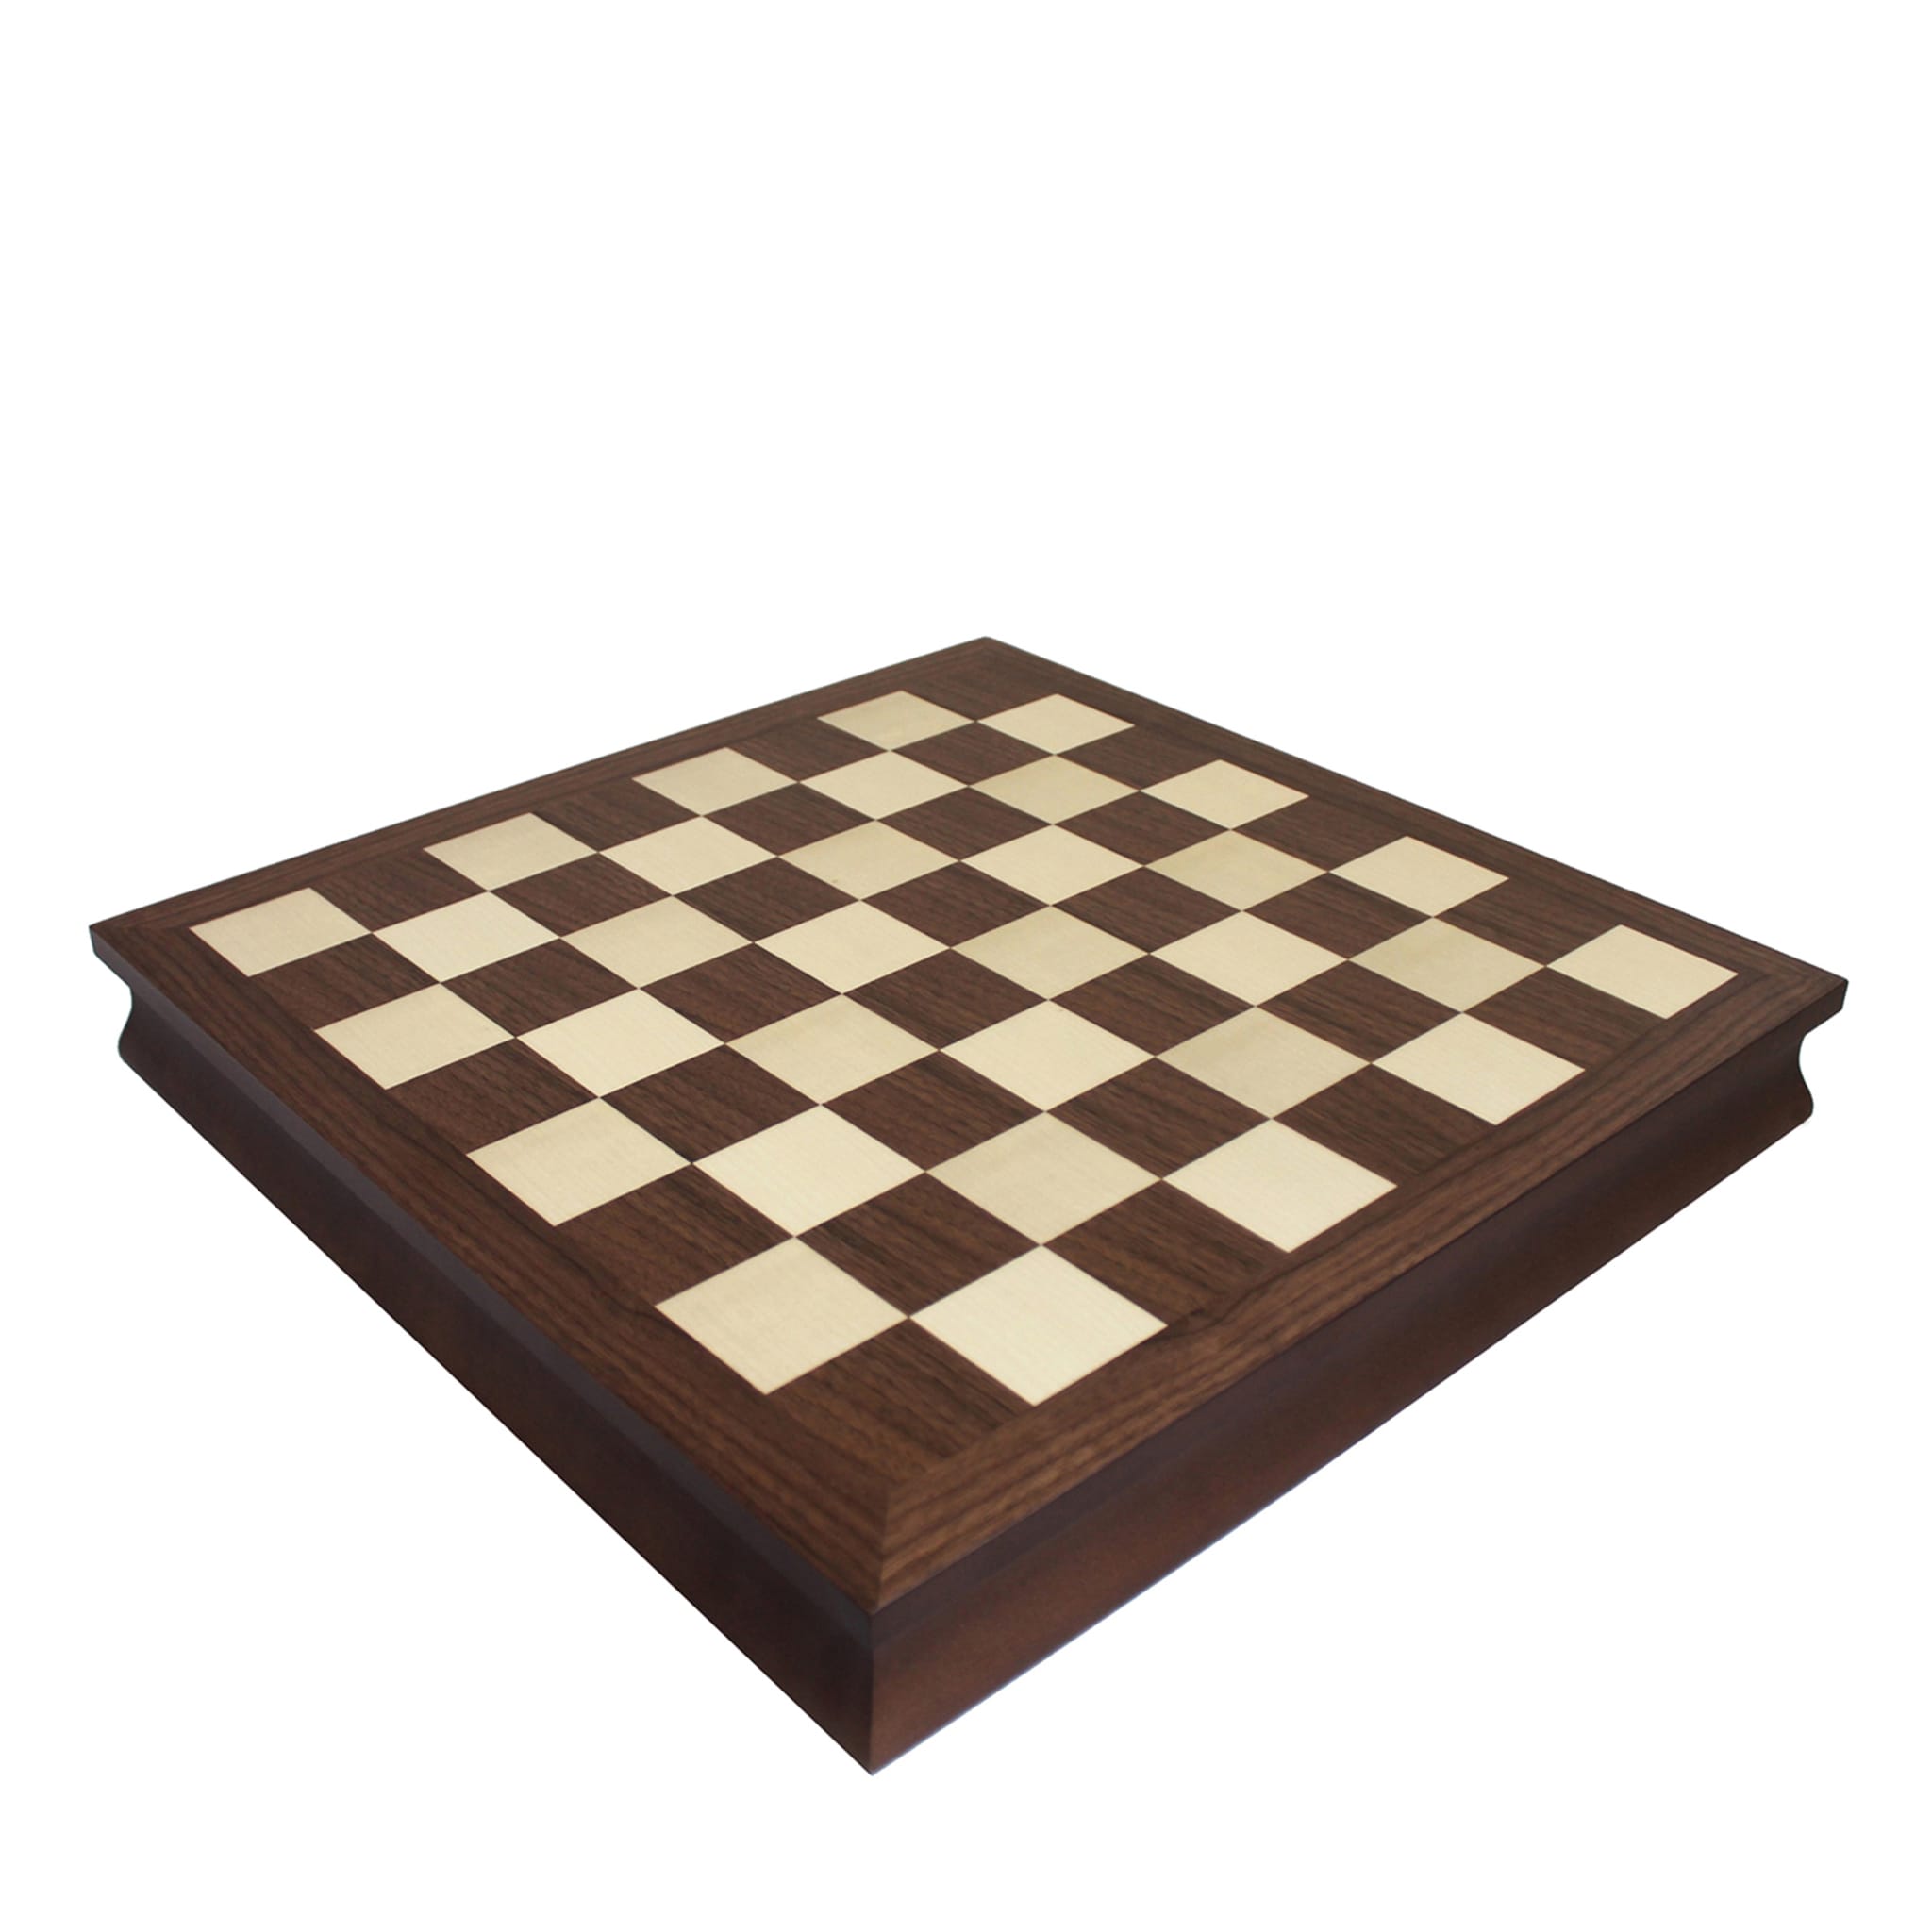 Traditional Chess Set - Alternative view 1